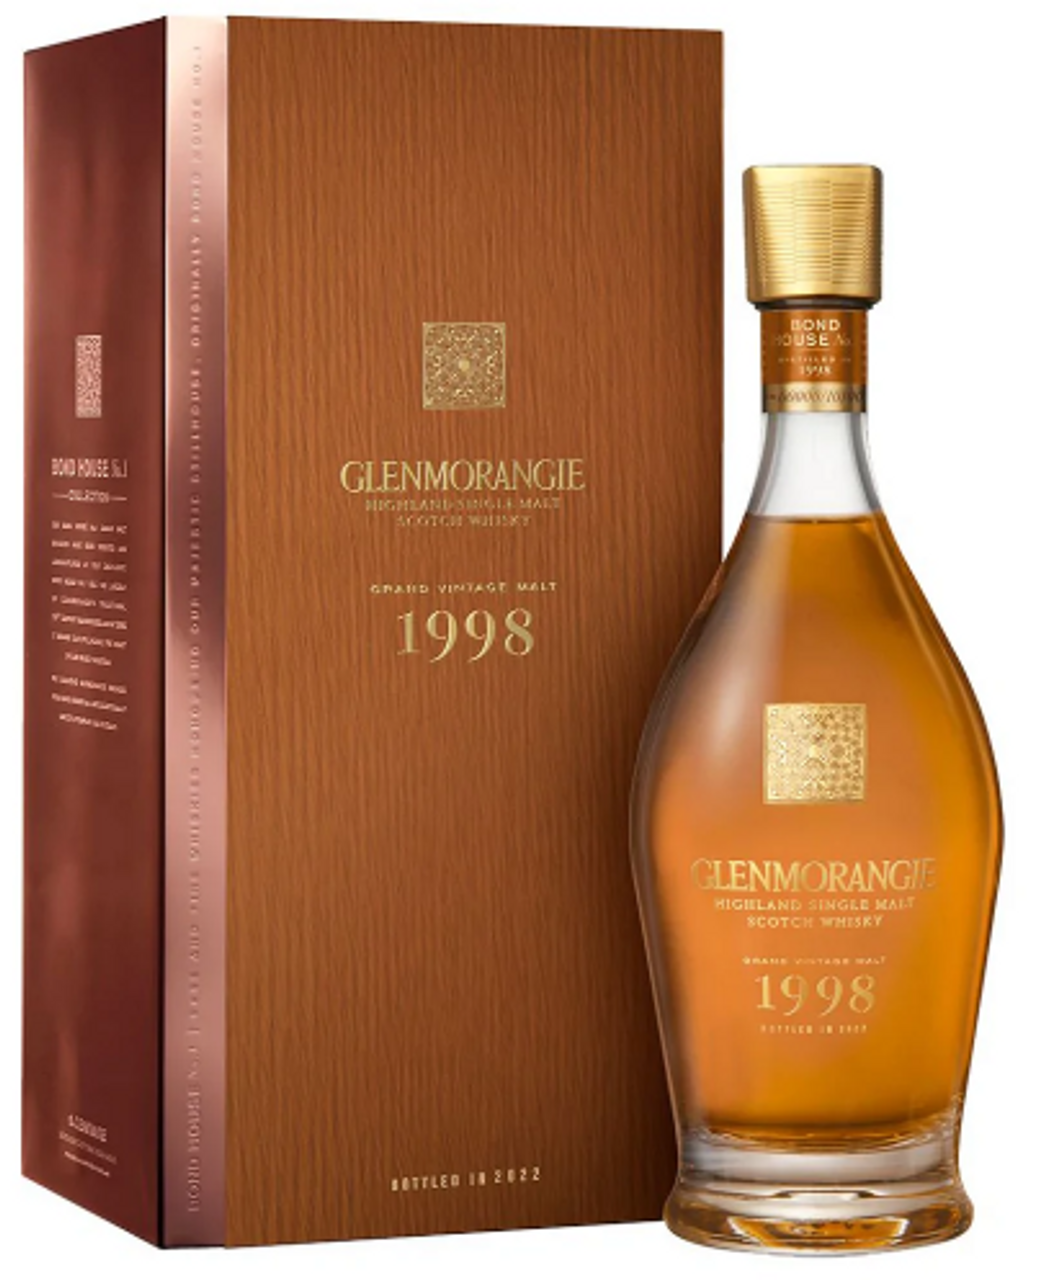 Glenmorangie The Original 10 Year Old Single Malt Whisky - Brown Derby  Liquor Store - Alcohol Delivery in Springfield, MO